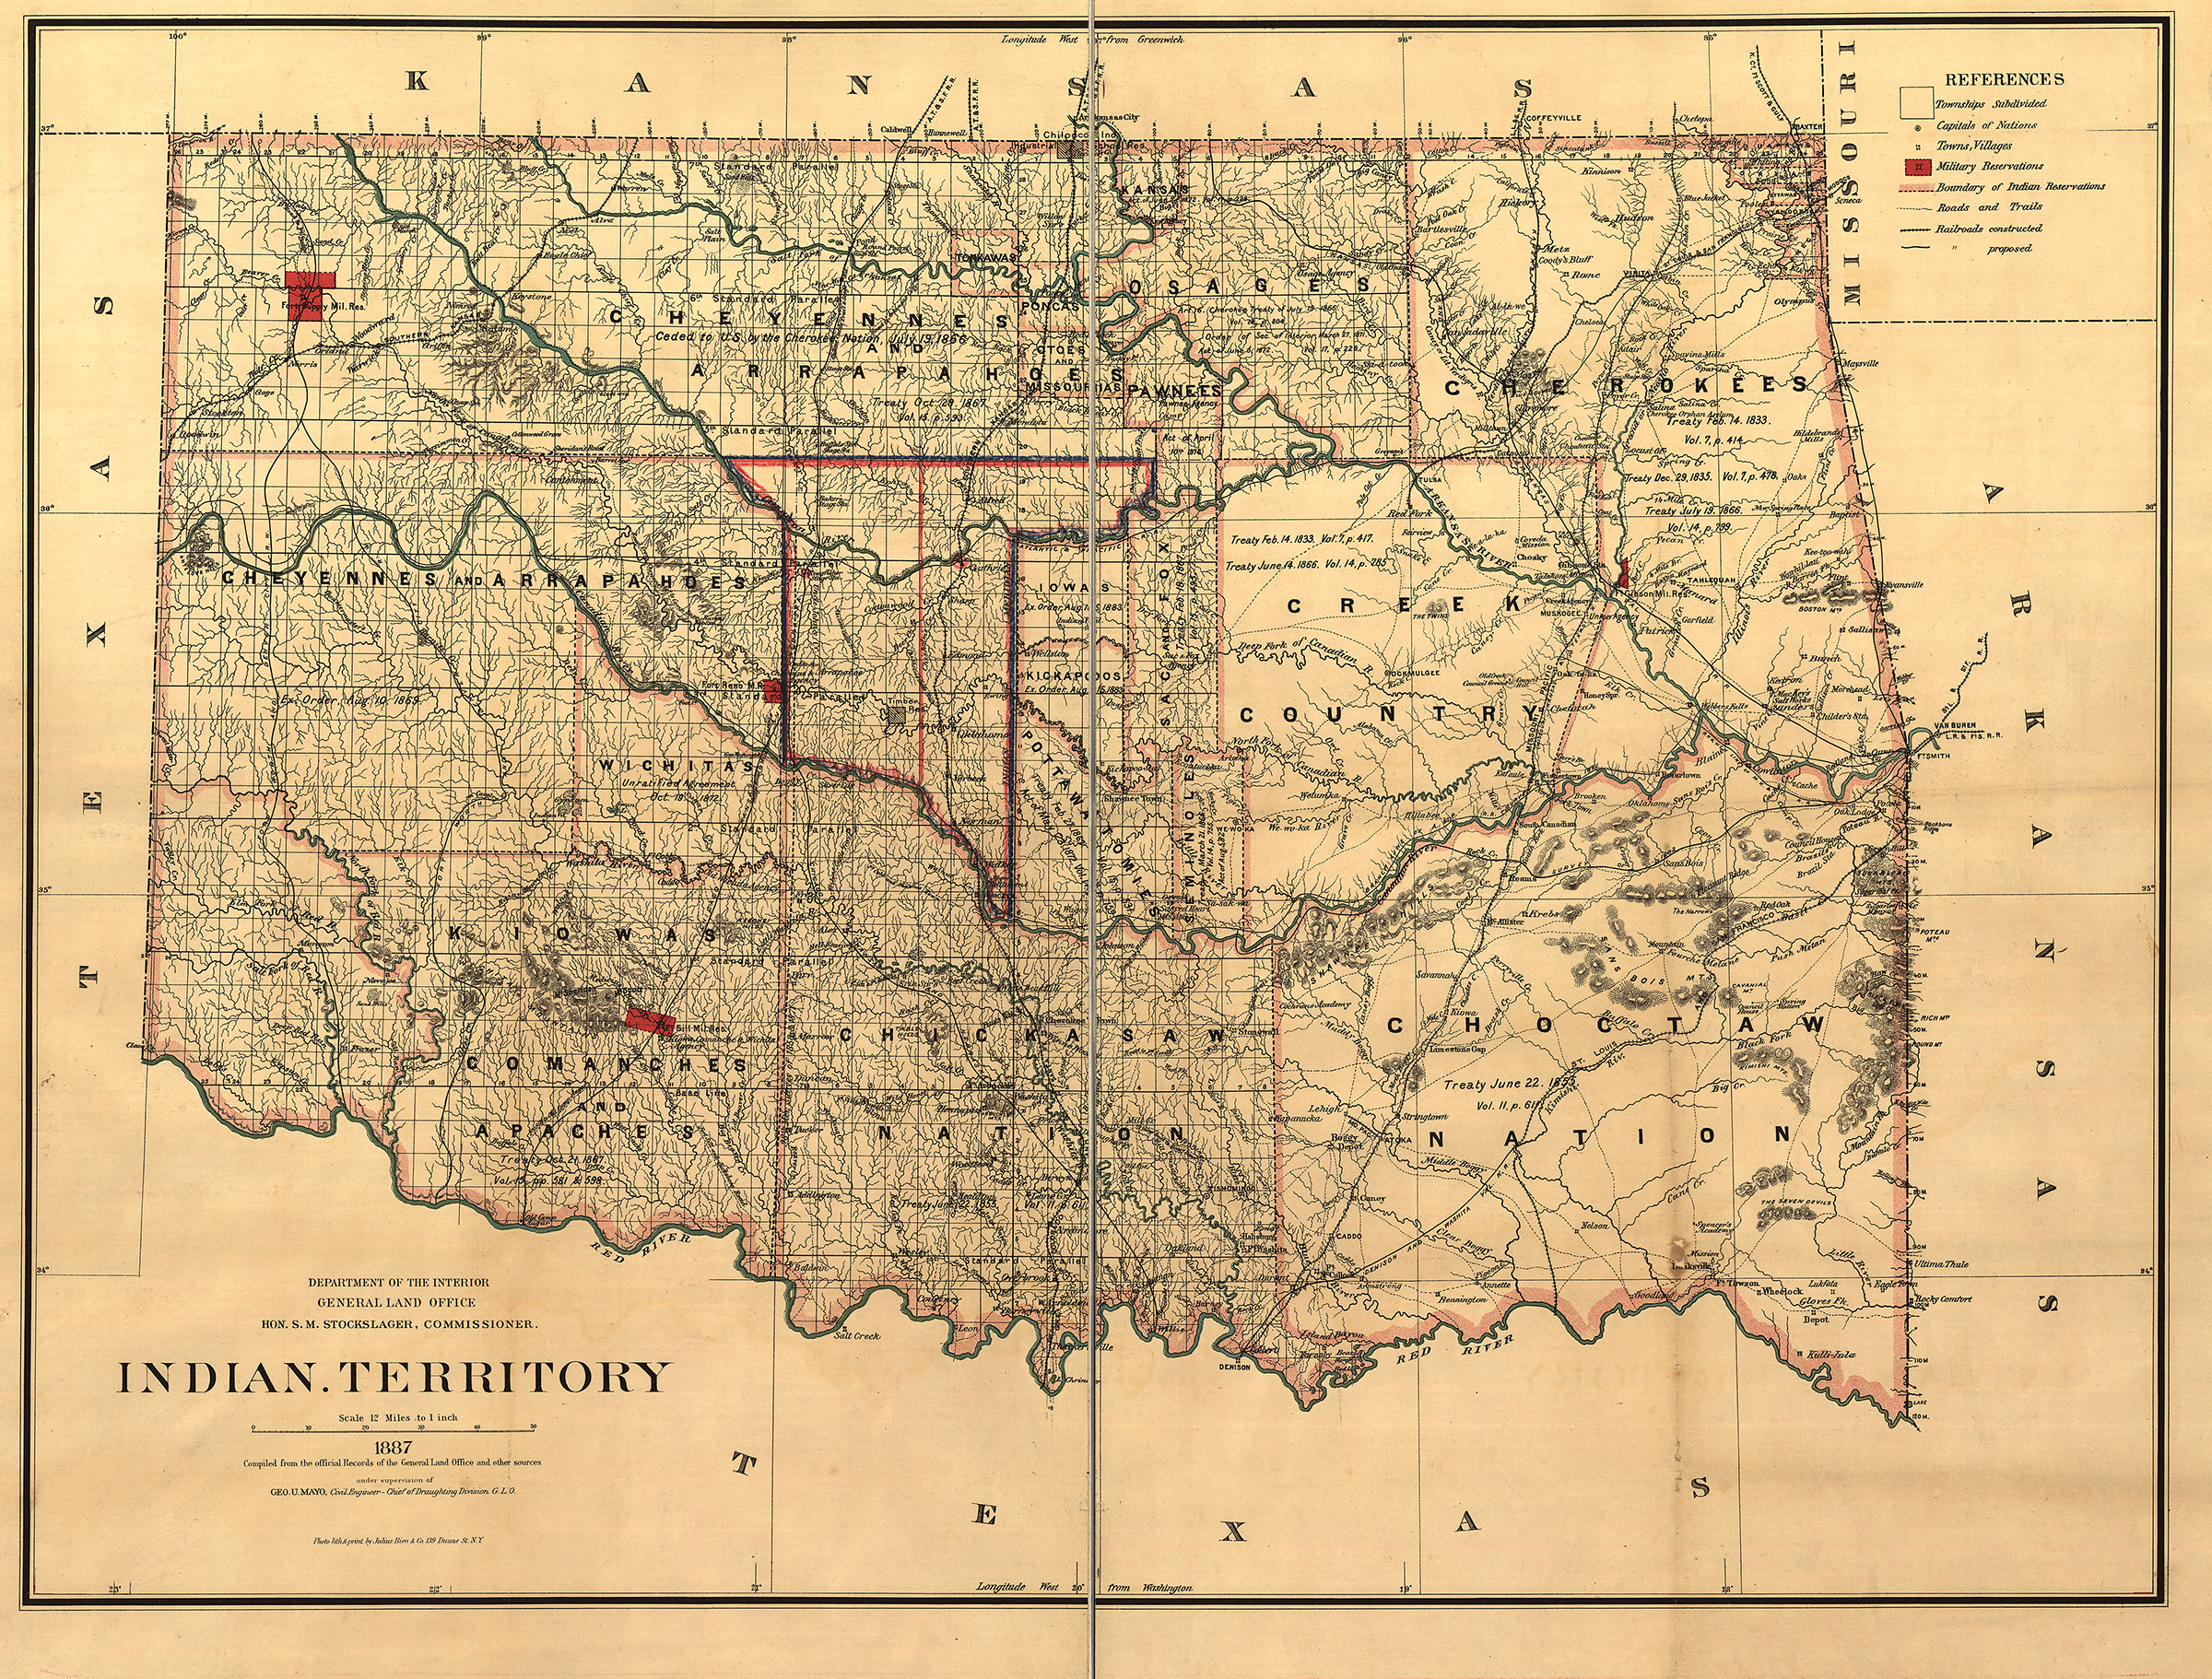 Indian Territory, Department of the Interior